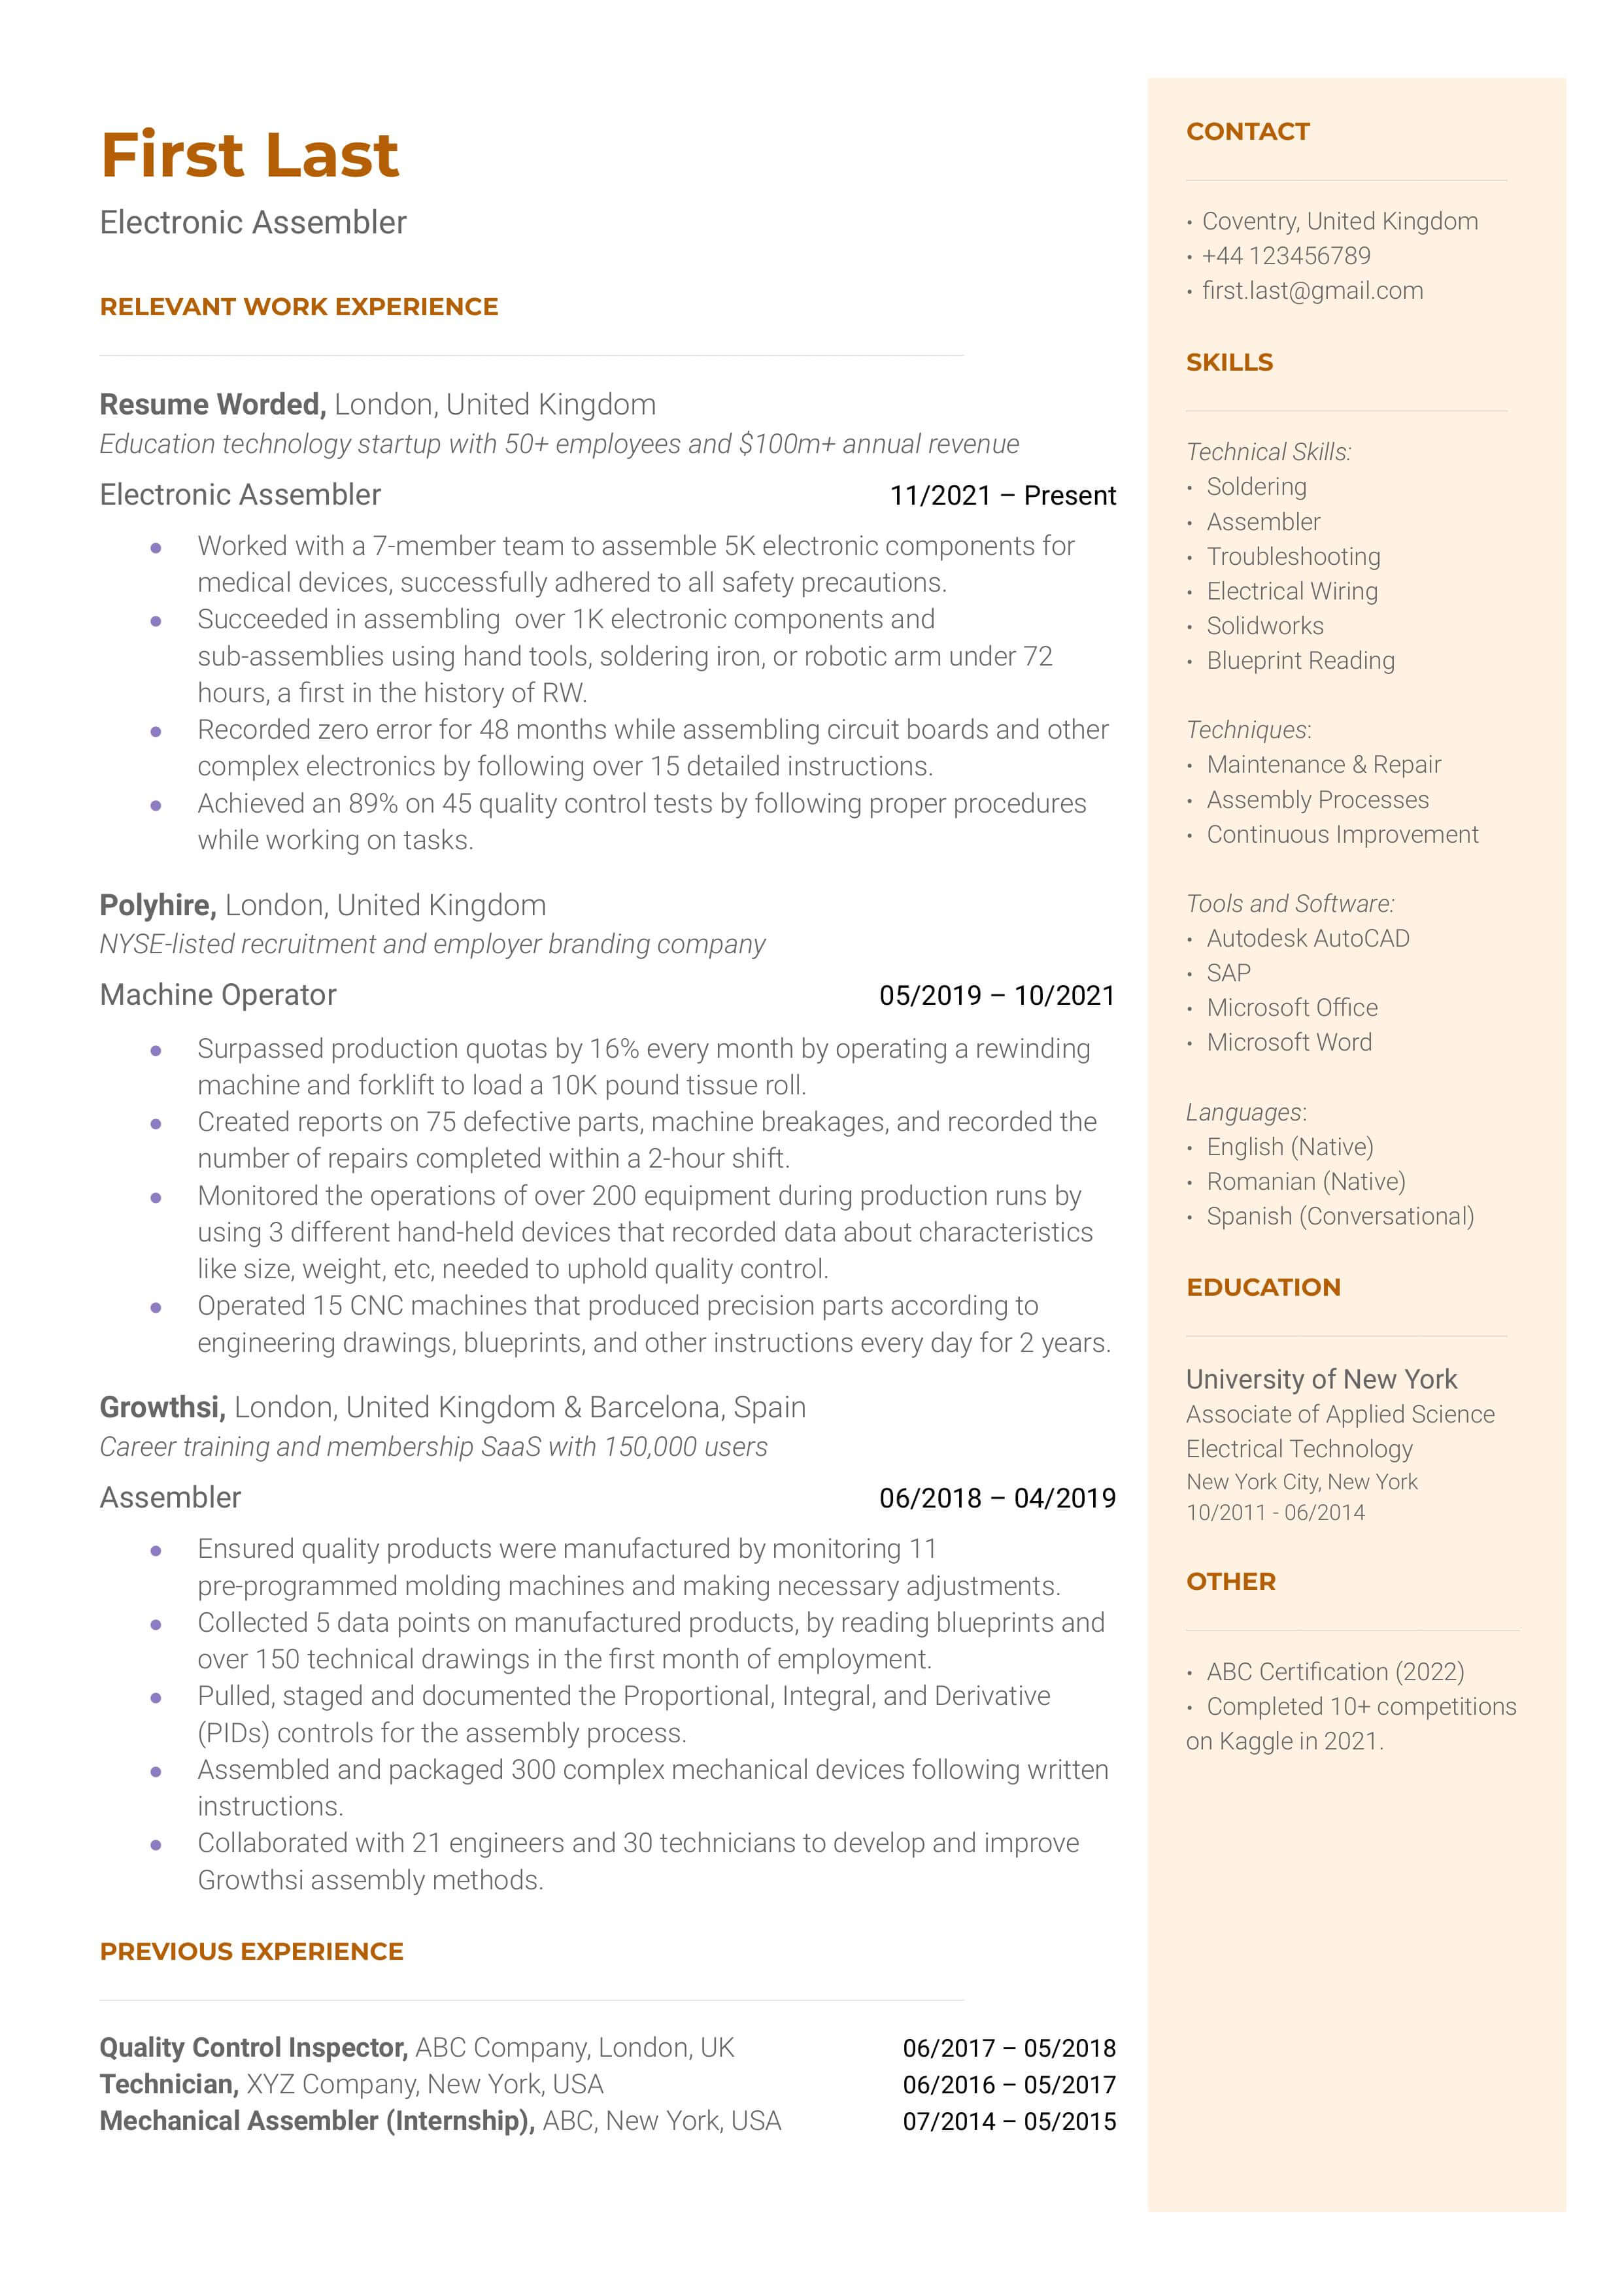 A well-crafted CV for an Electronic Assembler showcasing their experience with automation and environmental sustainability.